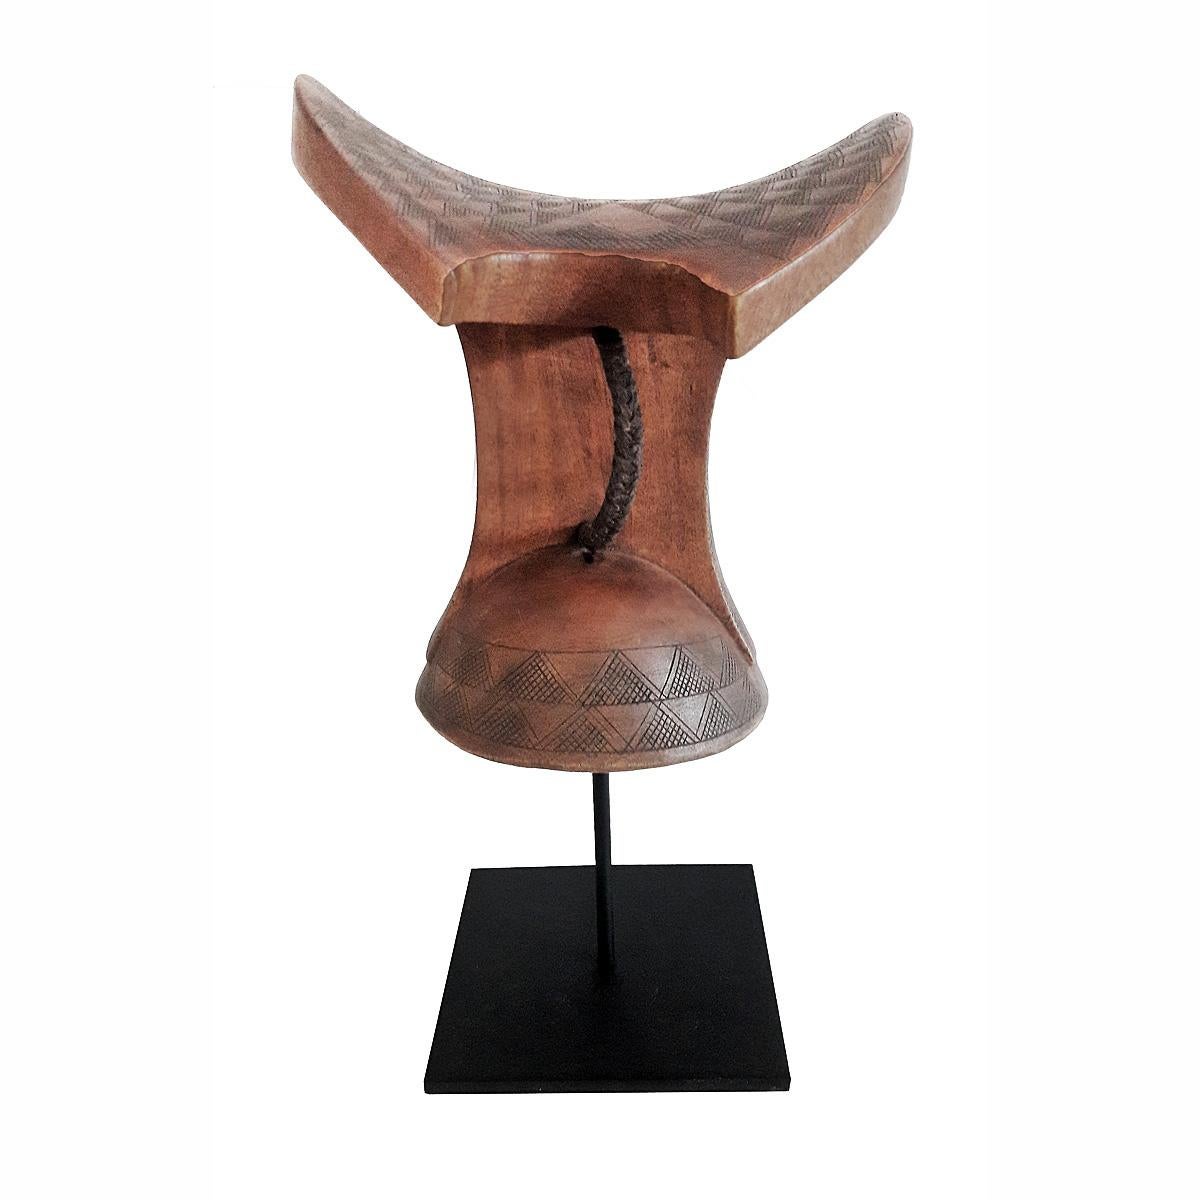 A headrest or stool, hand carved out of a single piece of teak wood, and decorated with traditional carvings, with a braided leather handle from Ethiopia, late 20th century. Mounted on a black metal stand.